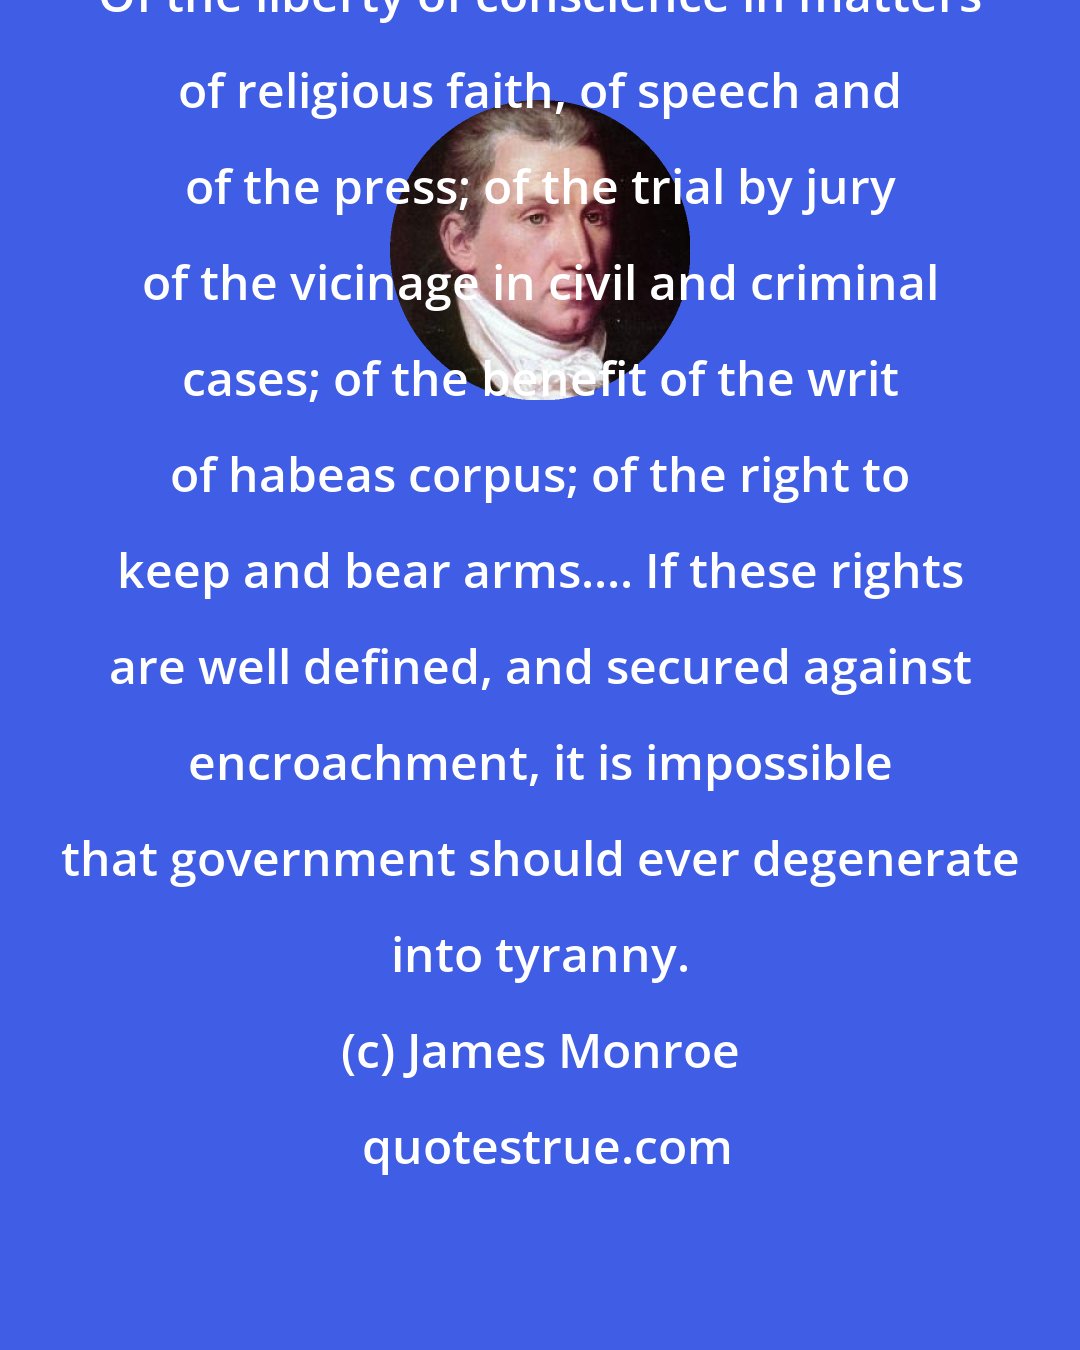 James Monroe: Of the liberty of conscience in matters of religious faith, of speech and of the press; of the trial by jury of the vicinage in civil and criminal cases; of the benefit of the writ of habeas corpus; of the right to keep and bear arms.... If these rights are well defined, and secured against encroachment, it is impossible that government should ever degenerate into tyranny.